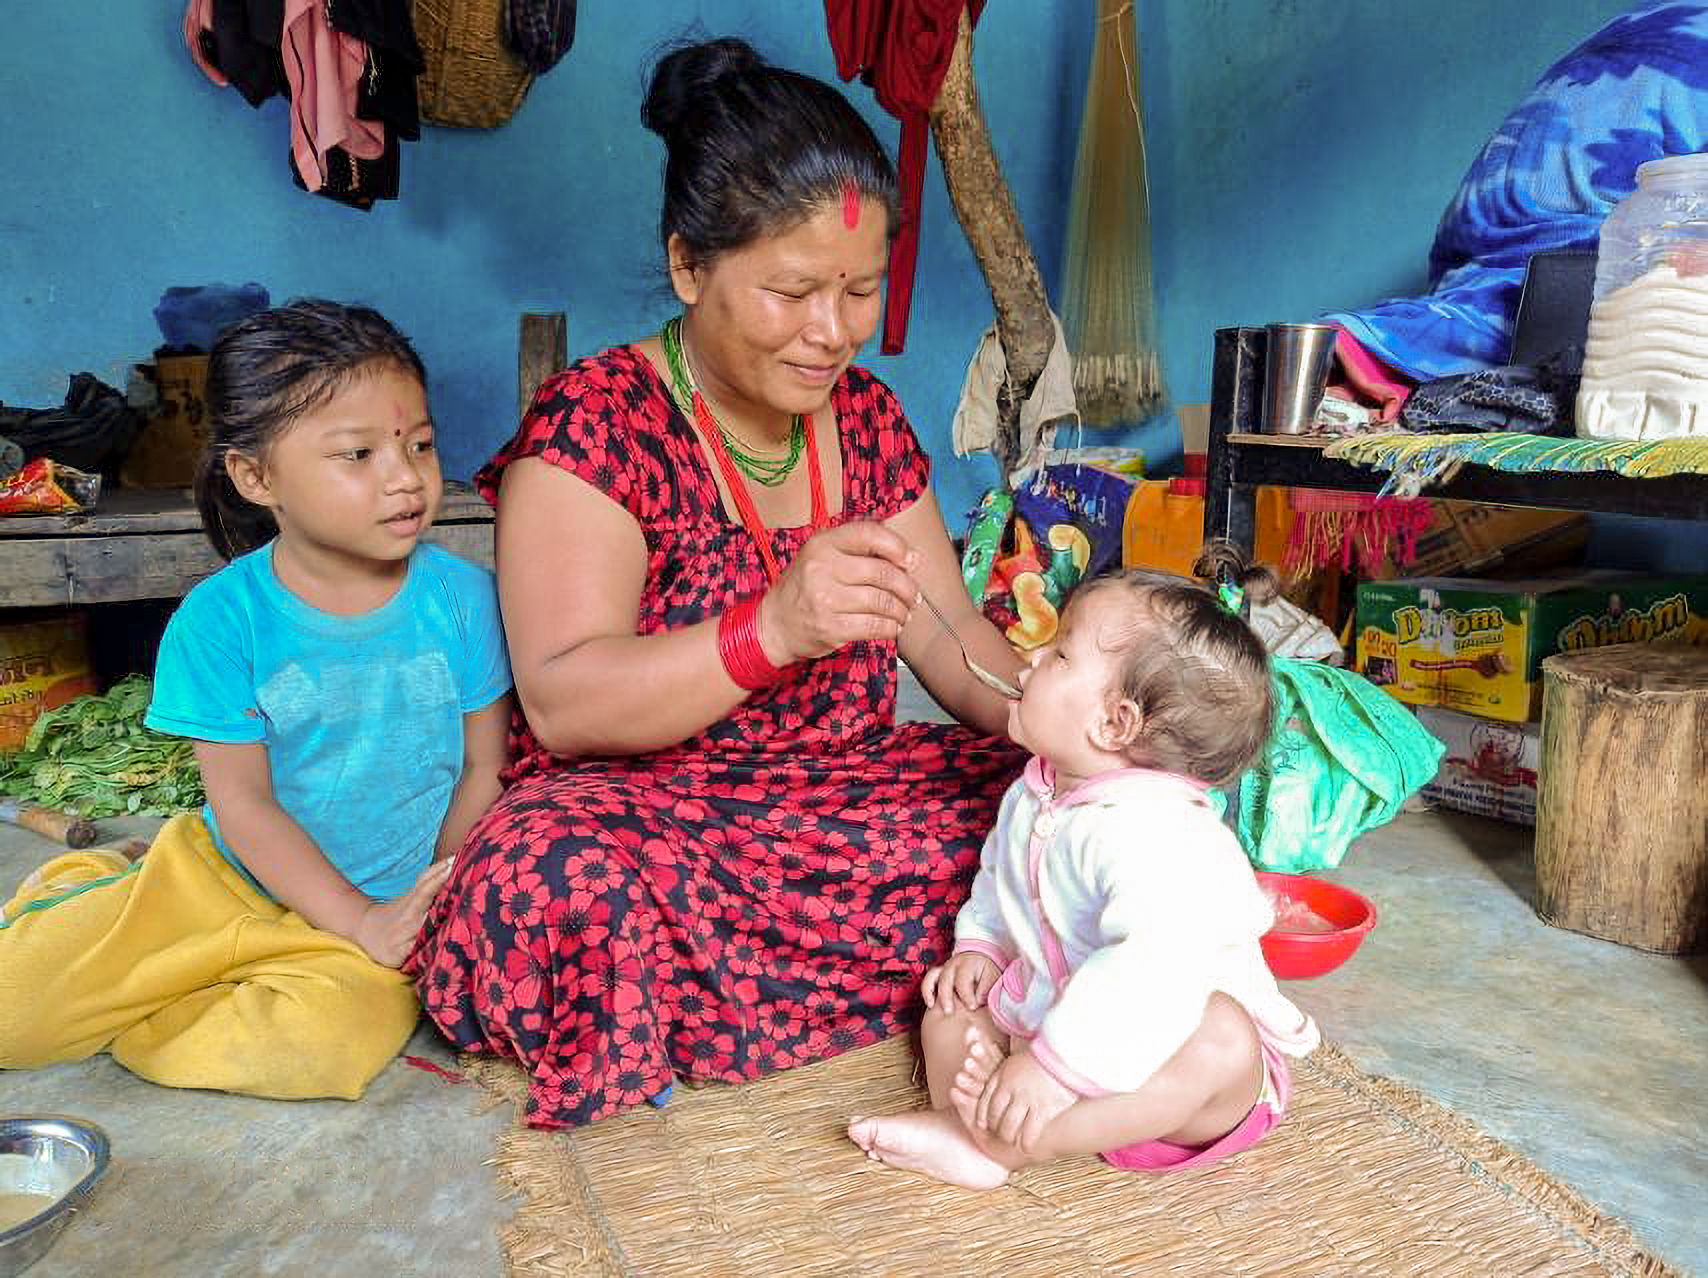 A Nepali woman sits on the ground and feeds a baby with a spoon. Another child is sitting to the left of her.